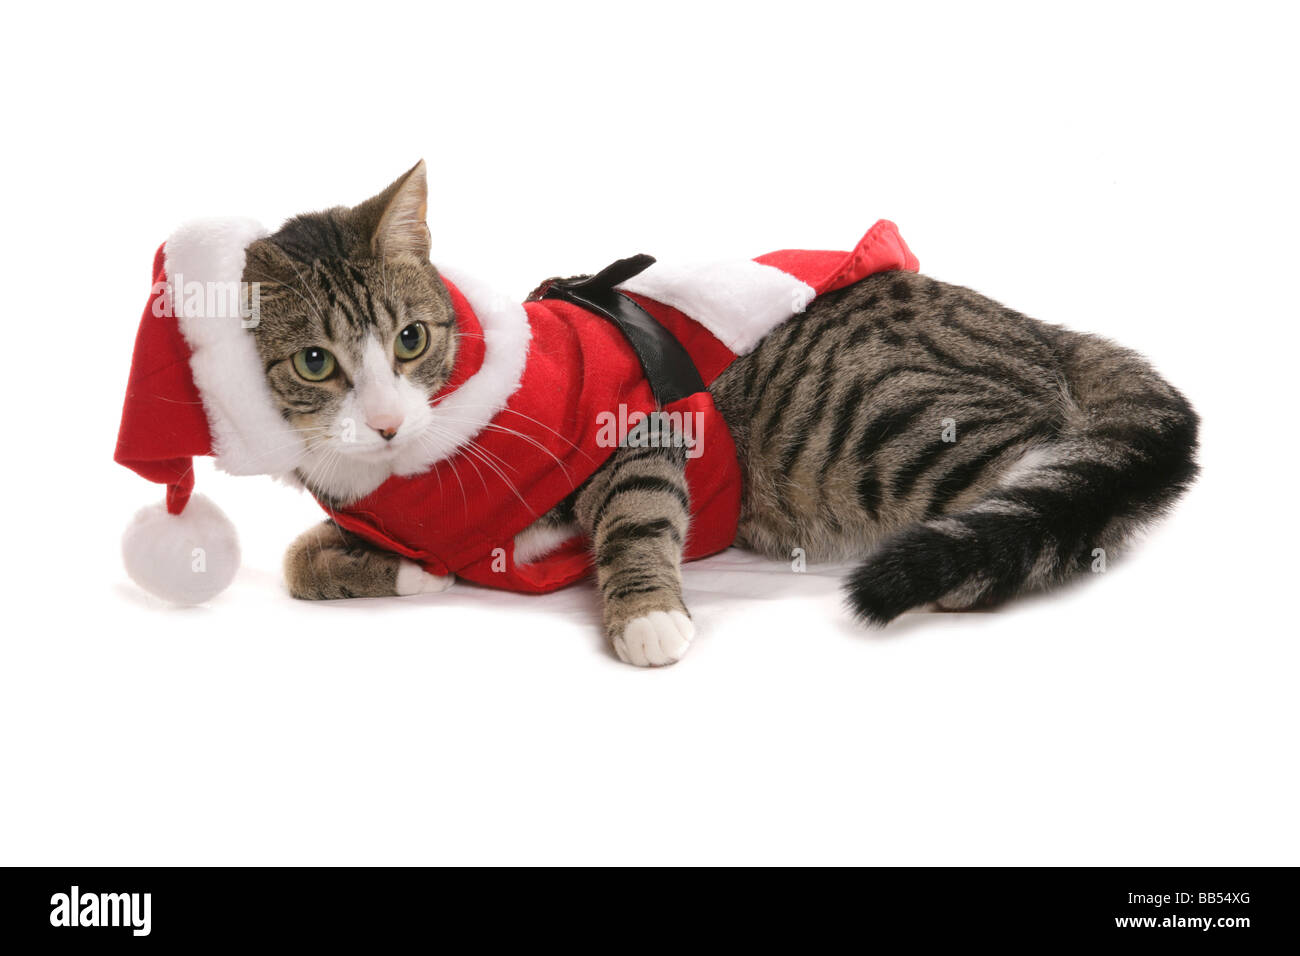 Pet cat dressed in christmas clothes Stock Photo